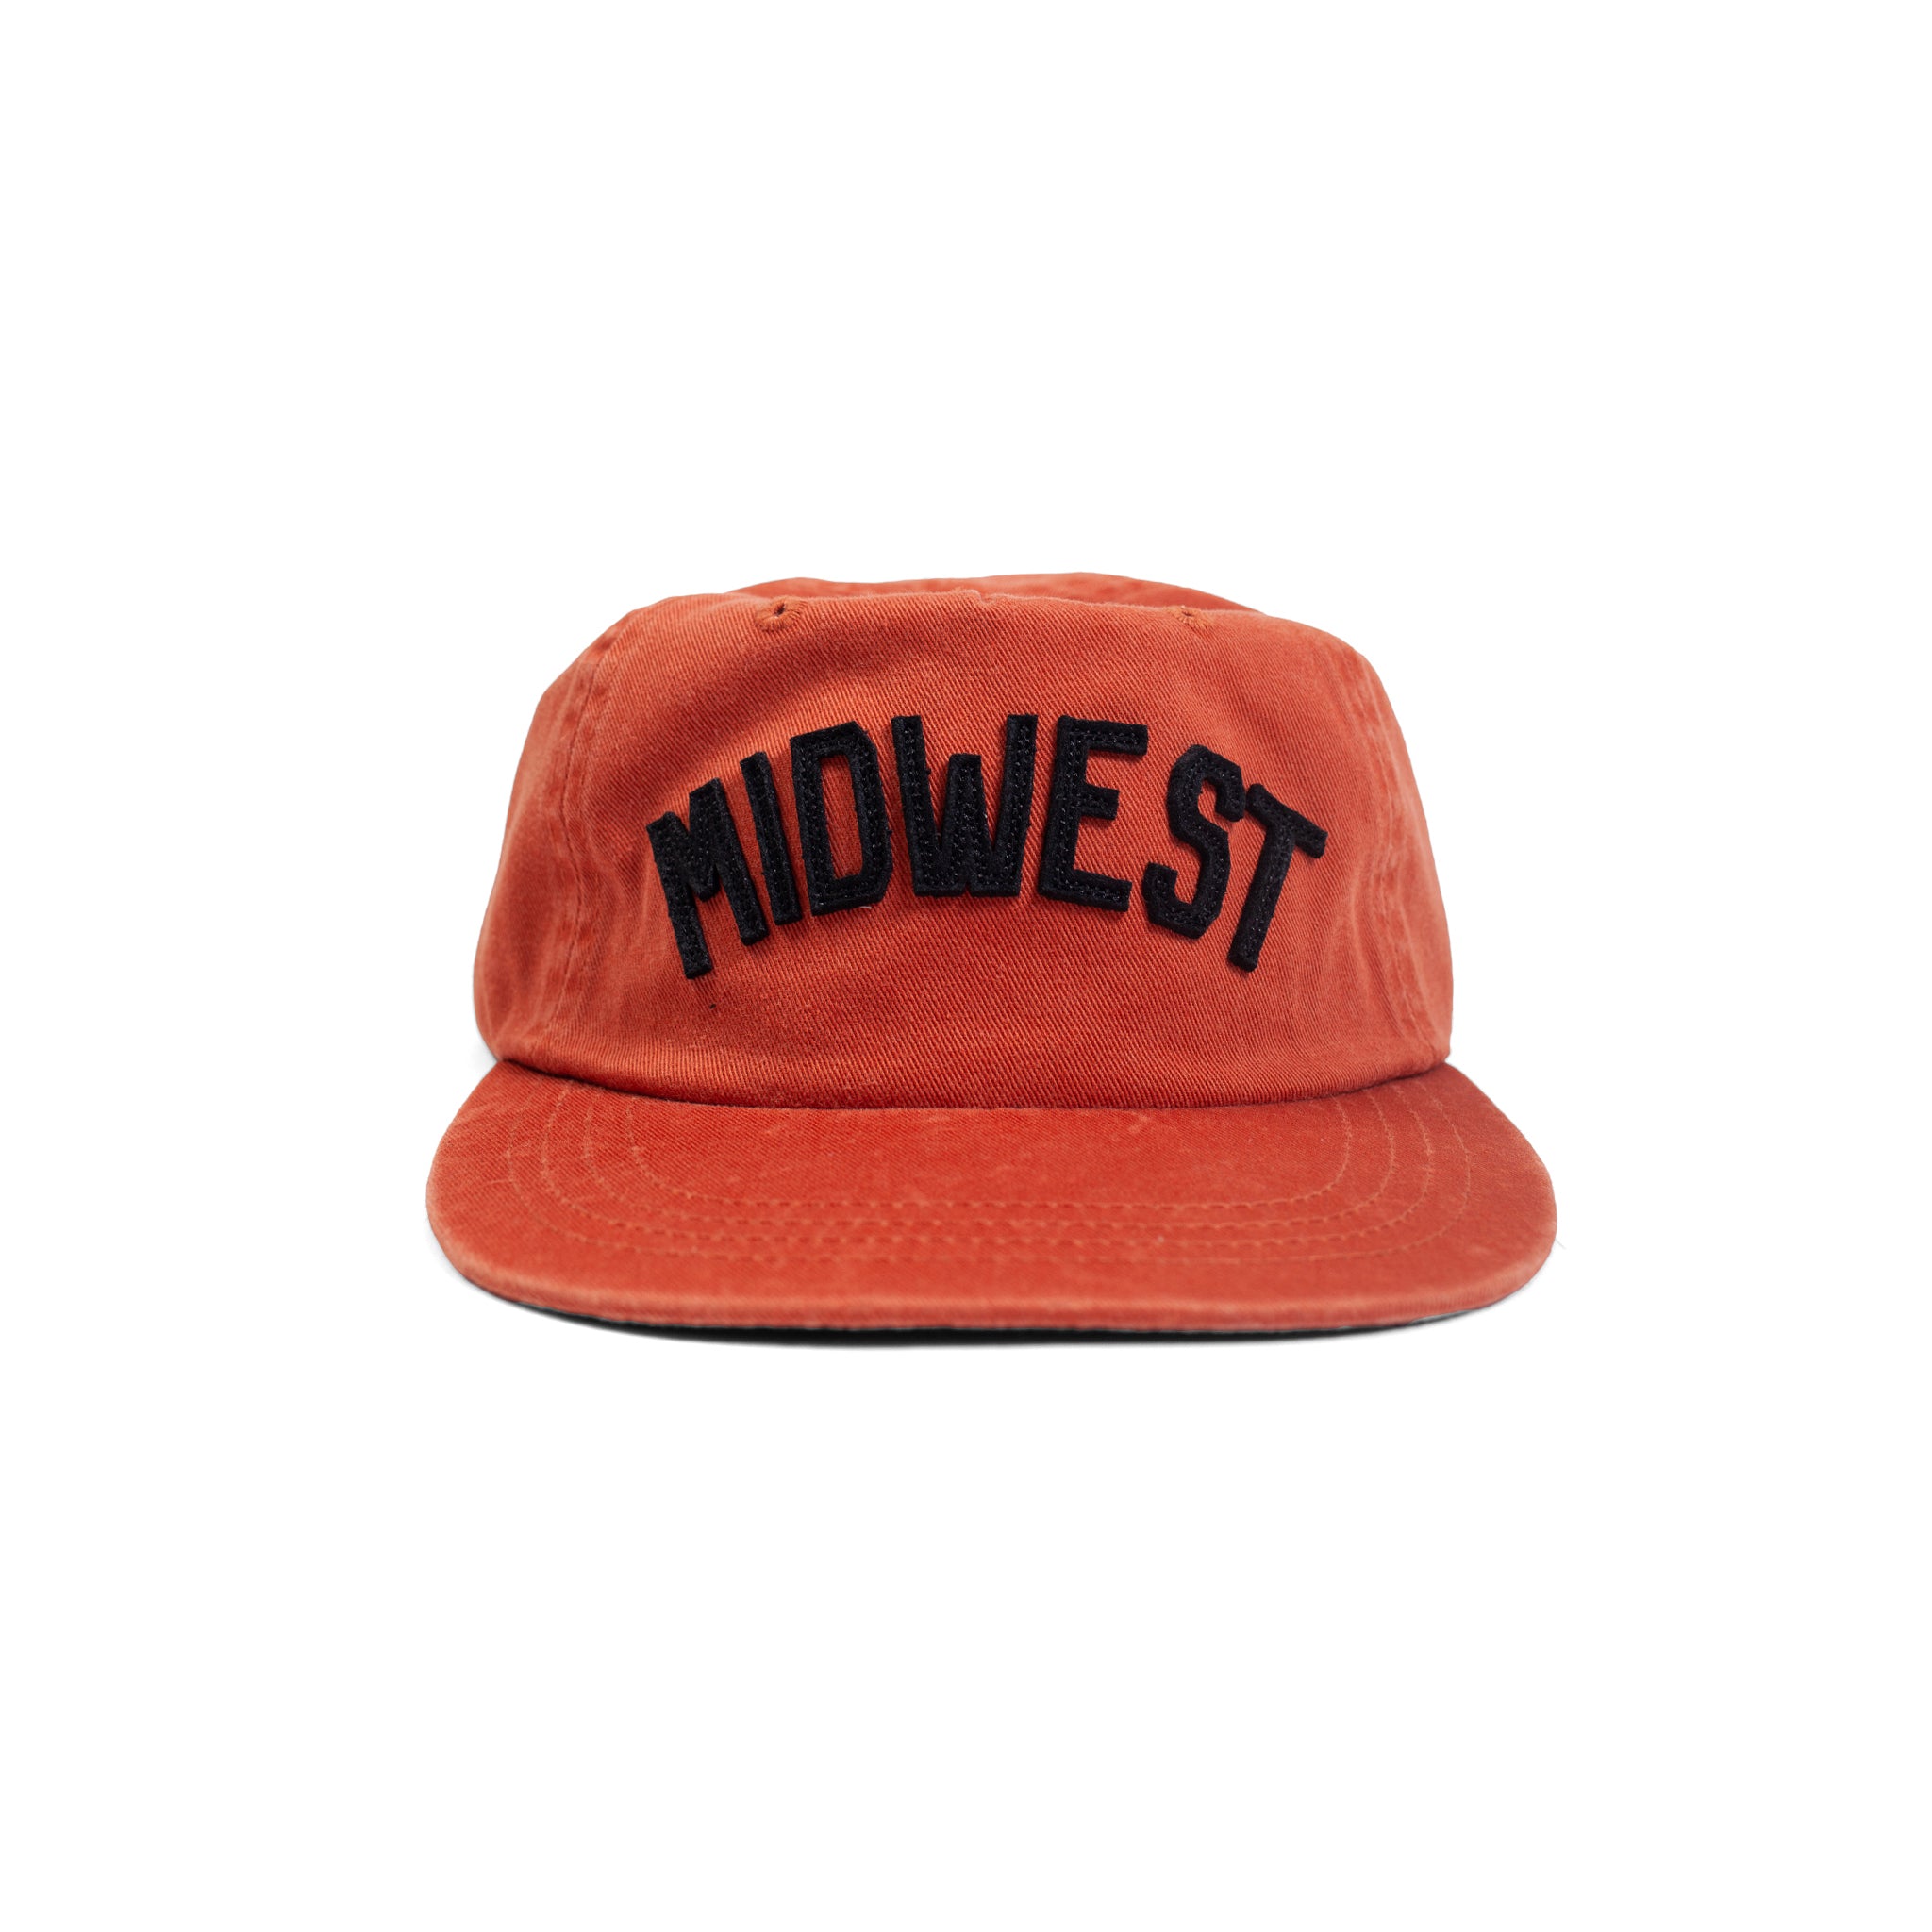 Midwest Hat - Rust